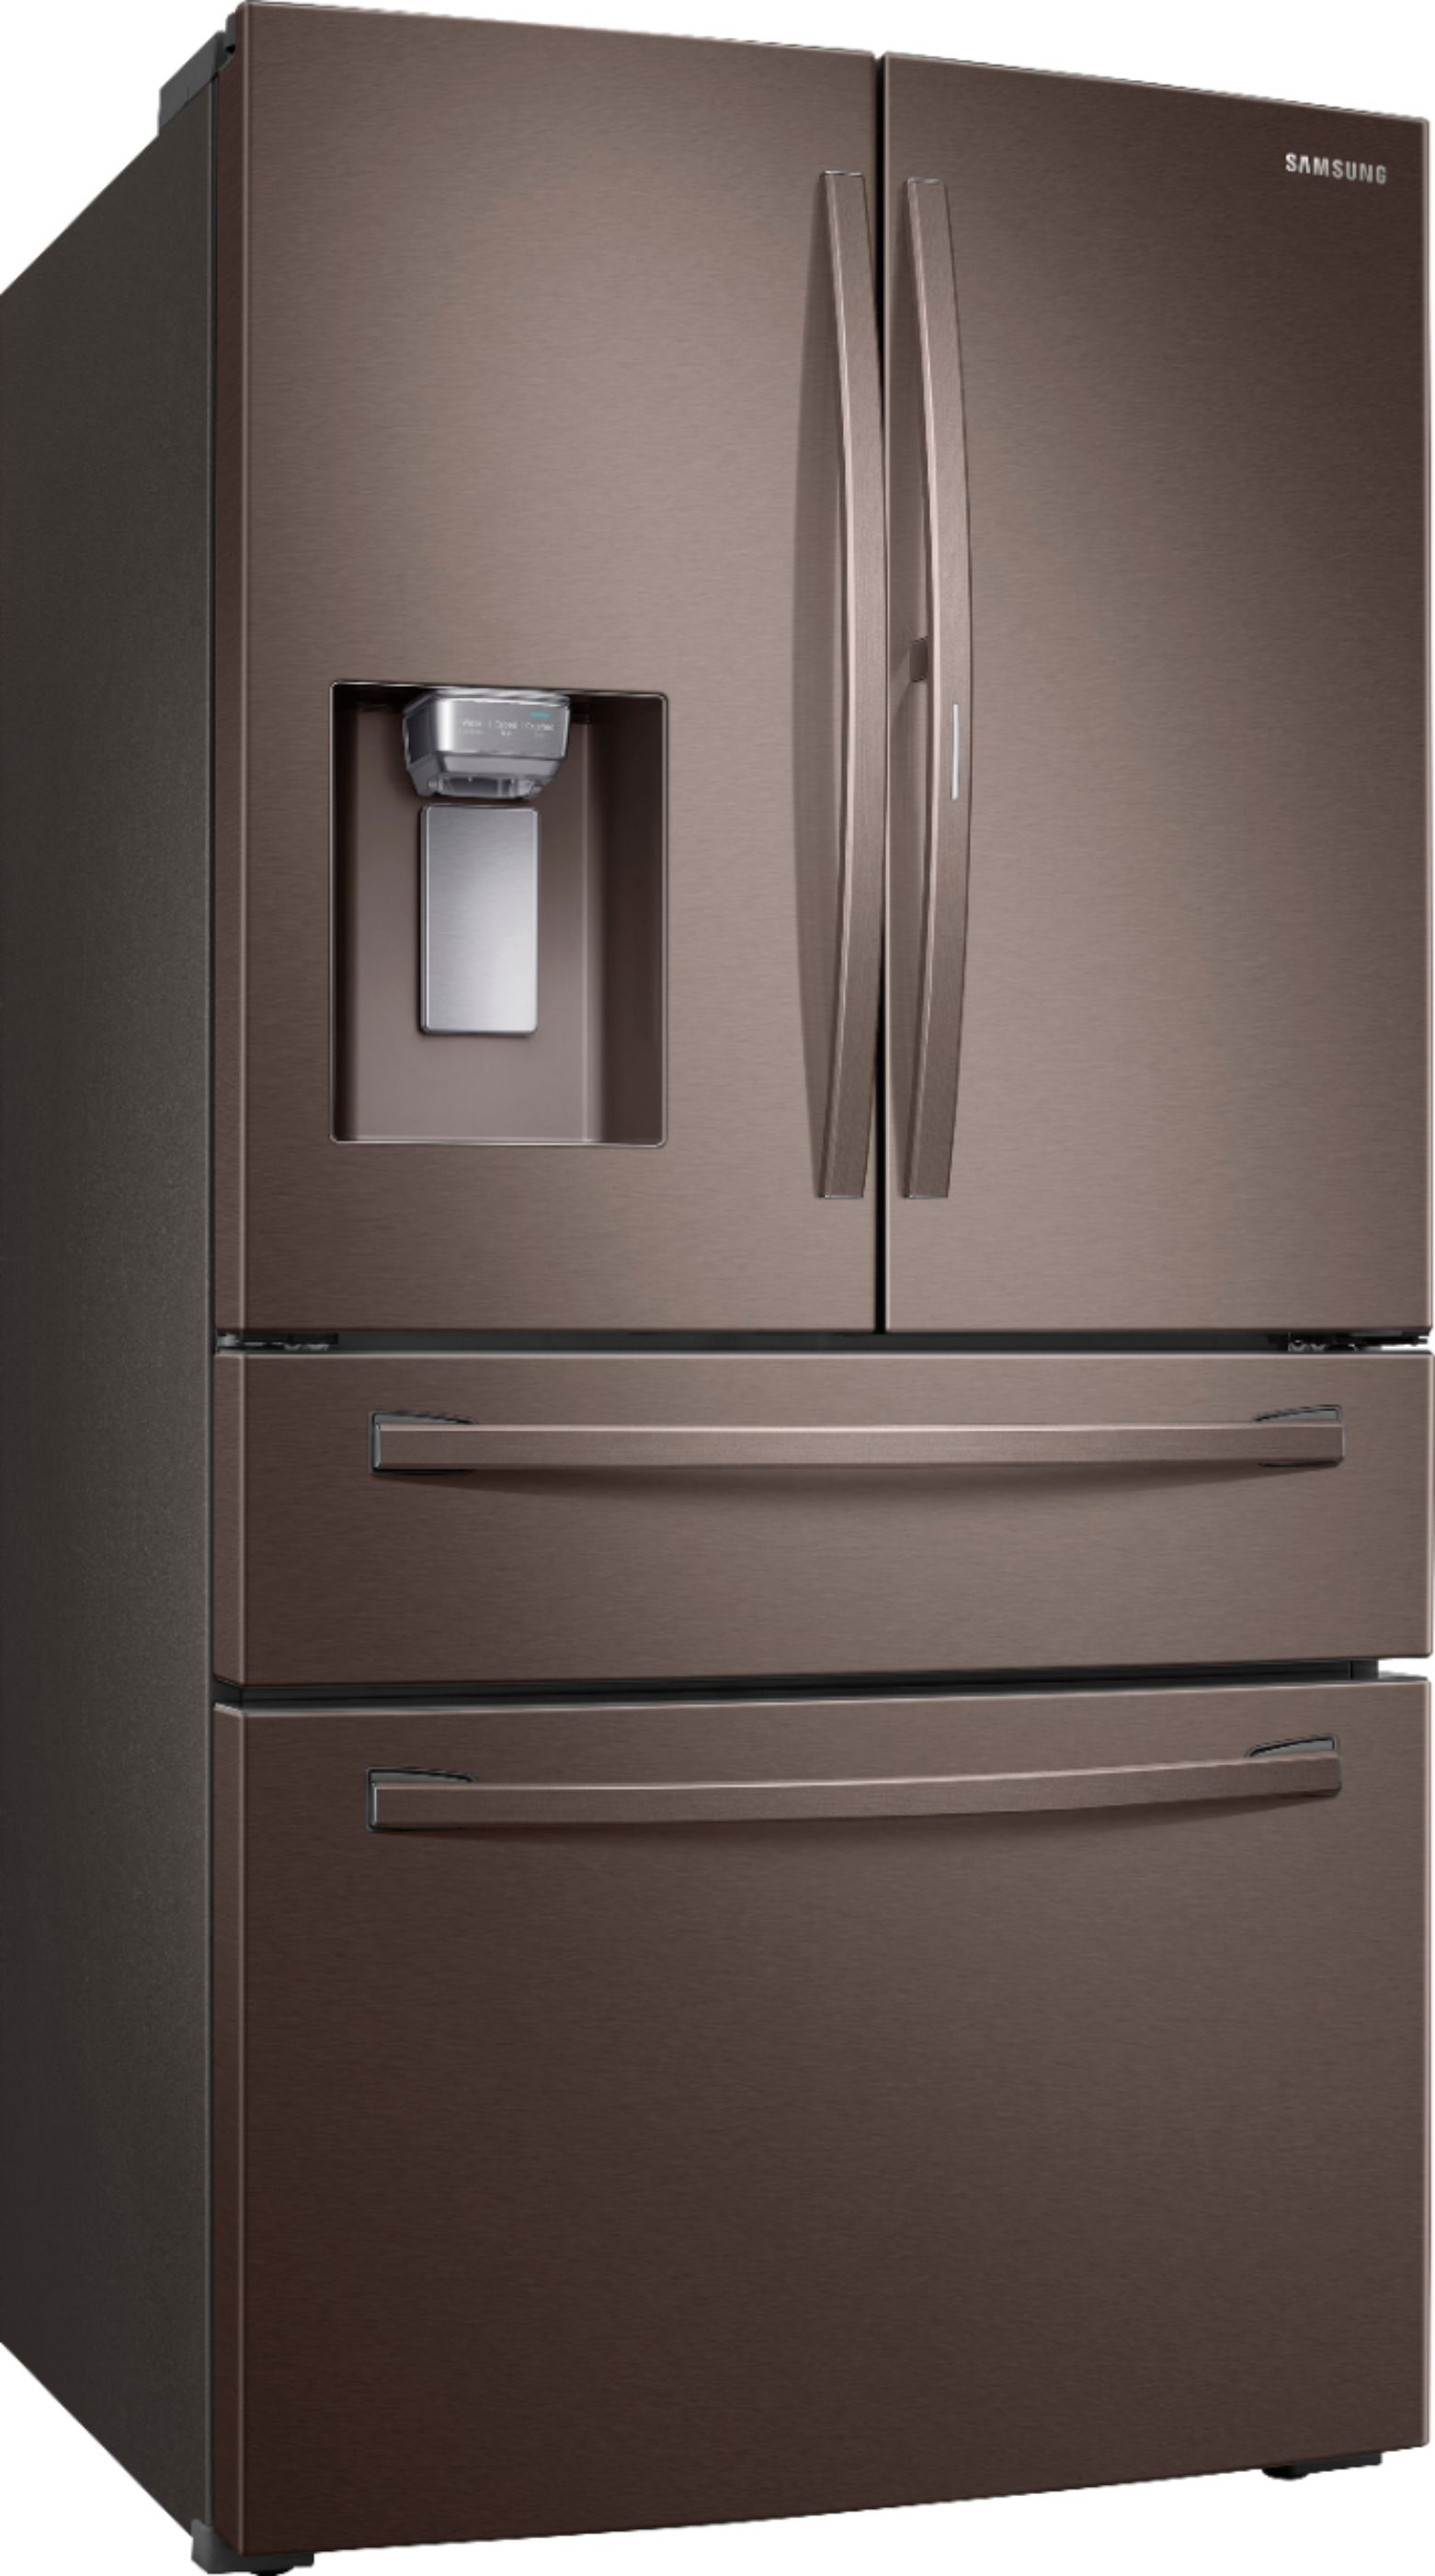 Angle View: Samsung - 27.8 Cu. Ft. 4-Door French Door Refrigerator with Food Showcase - Tuscan stainless steel